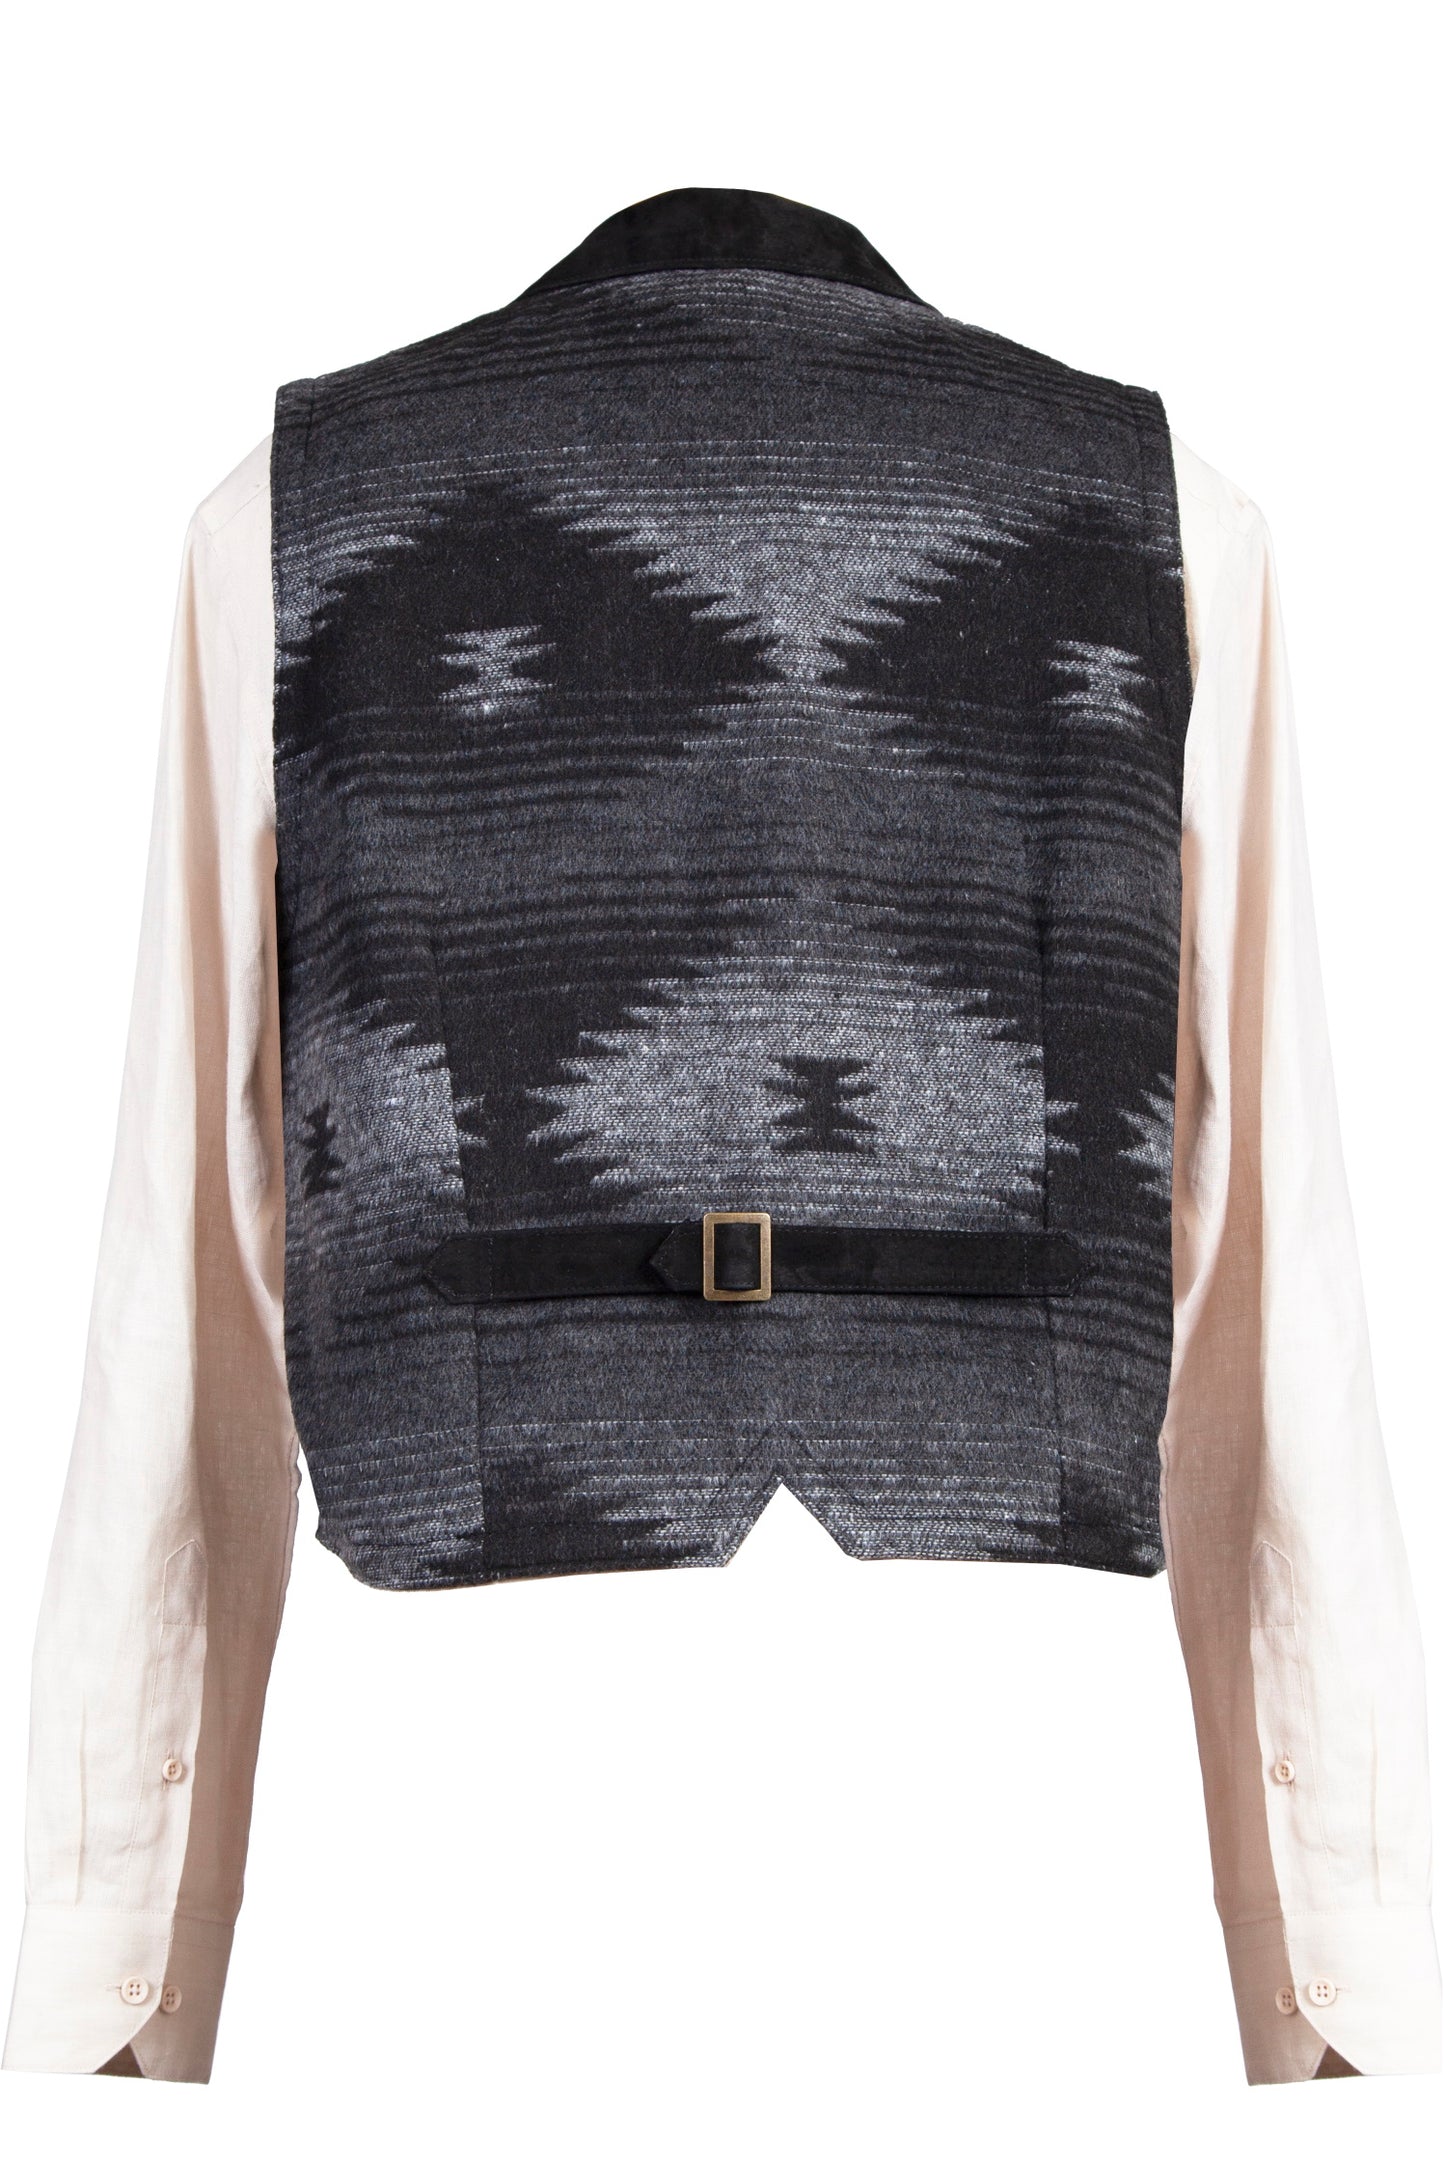 Scully Suede Vest with Knit Black